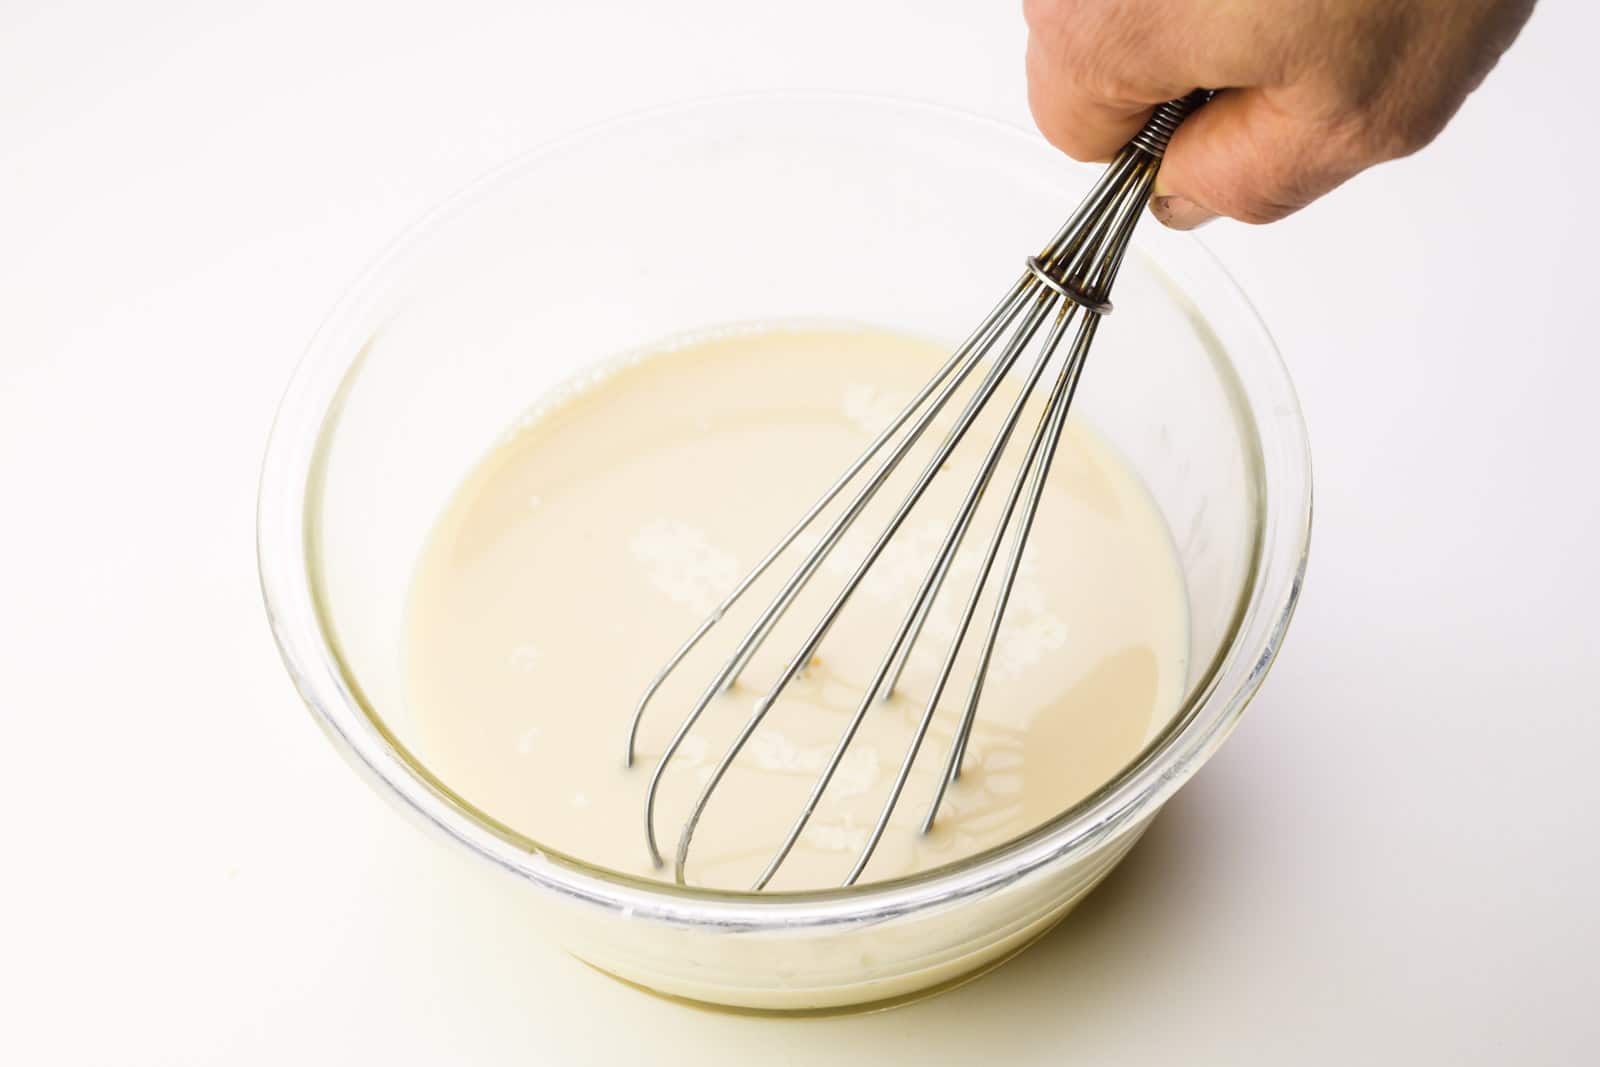 A hand holds a whisk, whisking a milk mixture in a glass pyrex bowl.